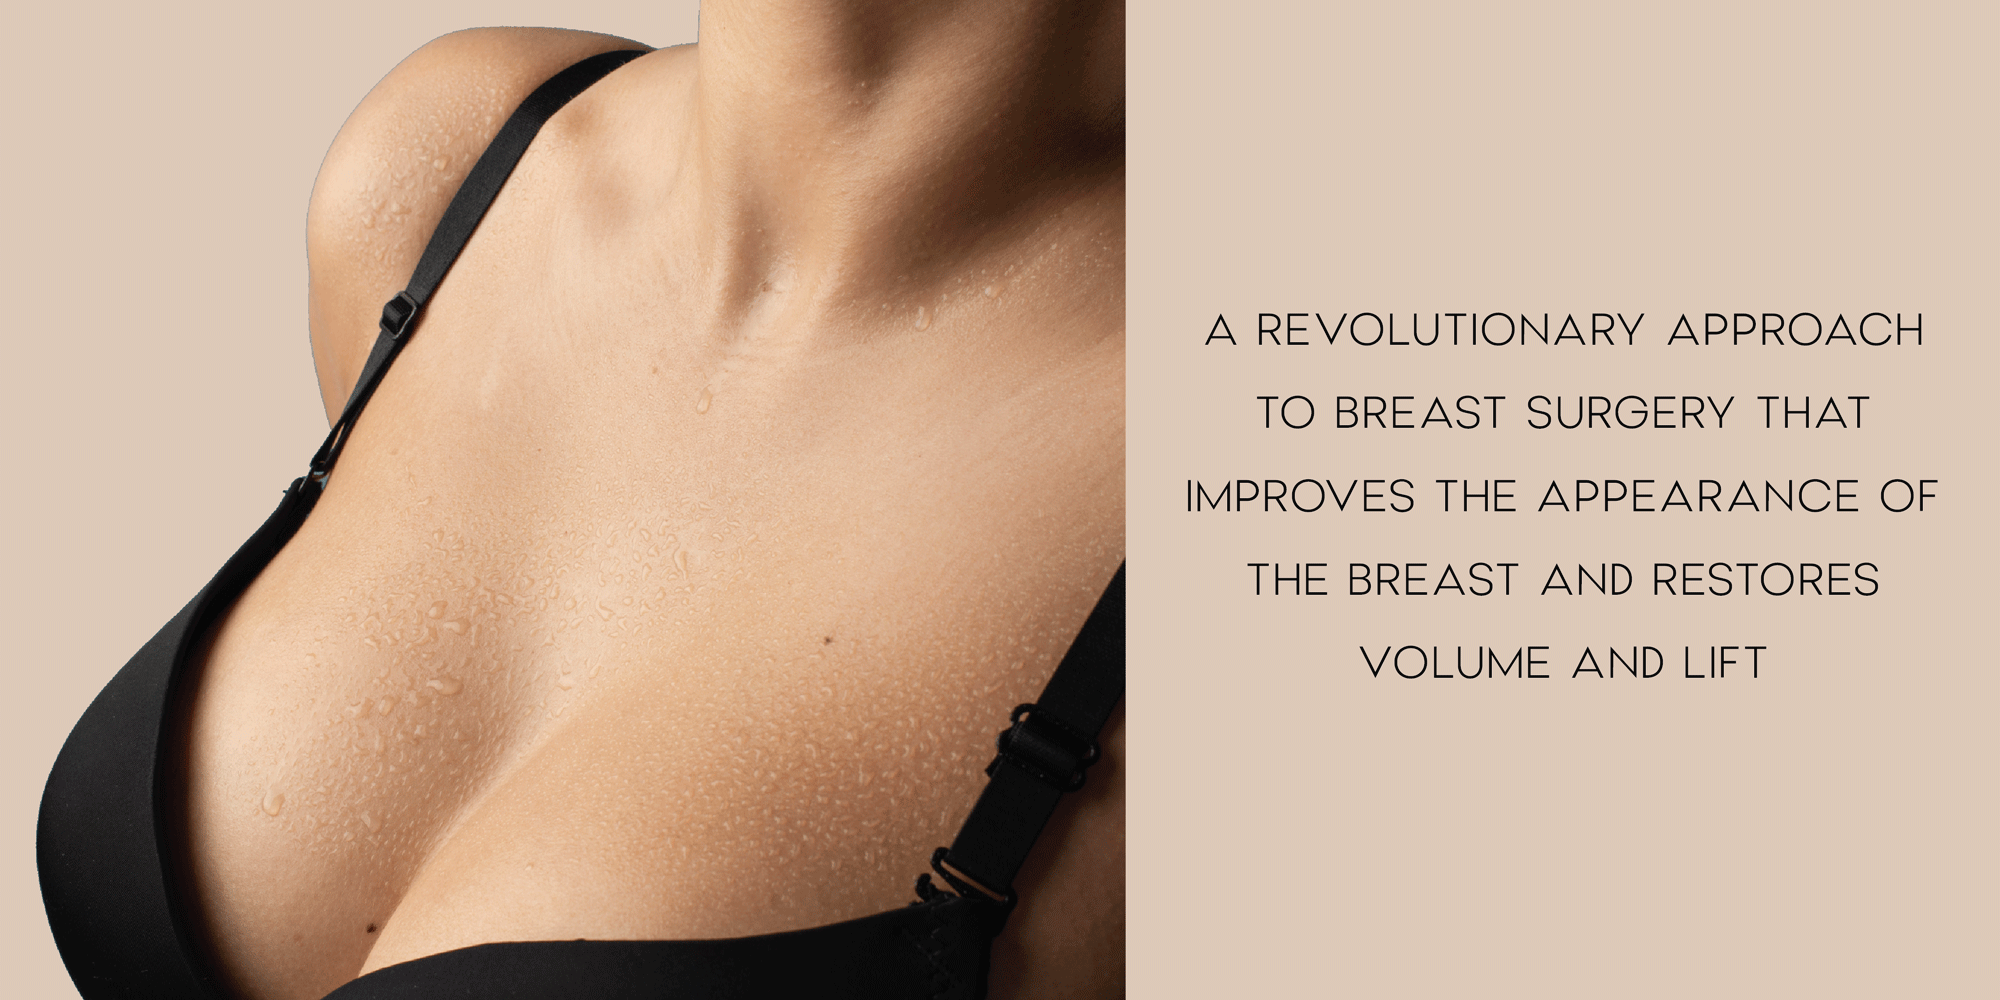 A revolutionary approach to breast surgery